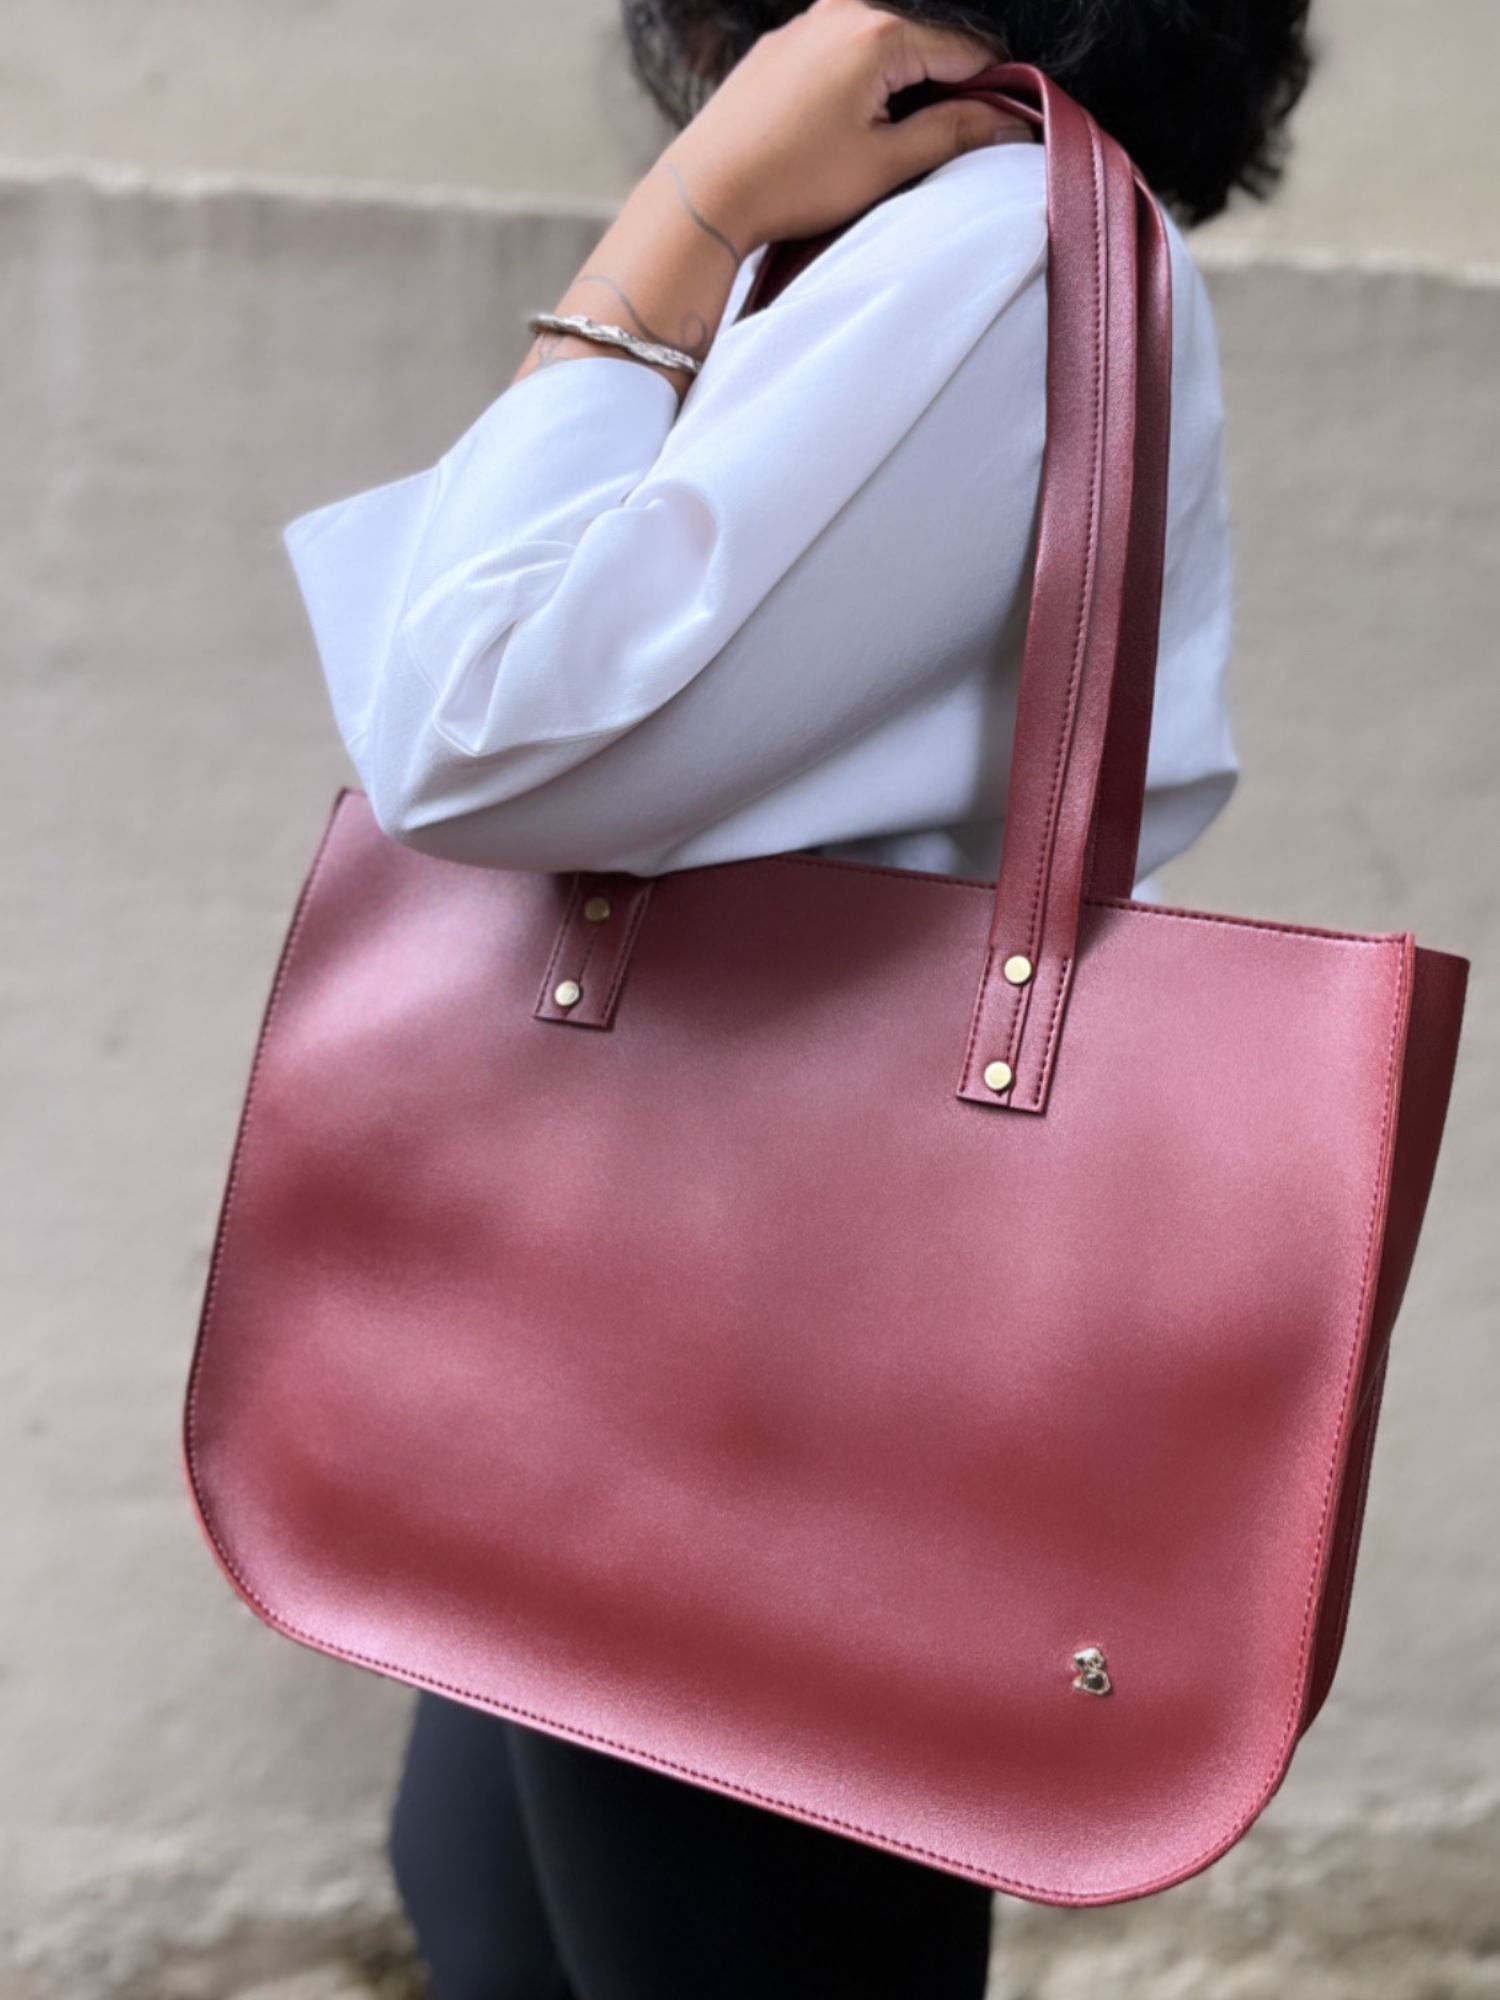 The Basic Tote - Maroon